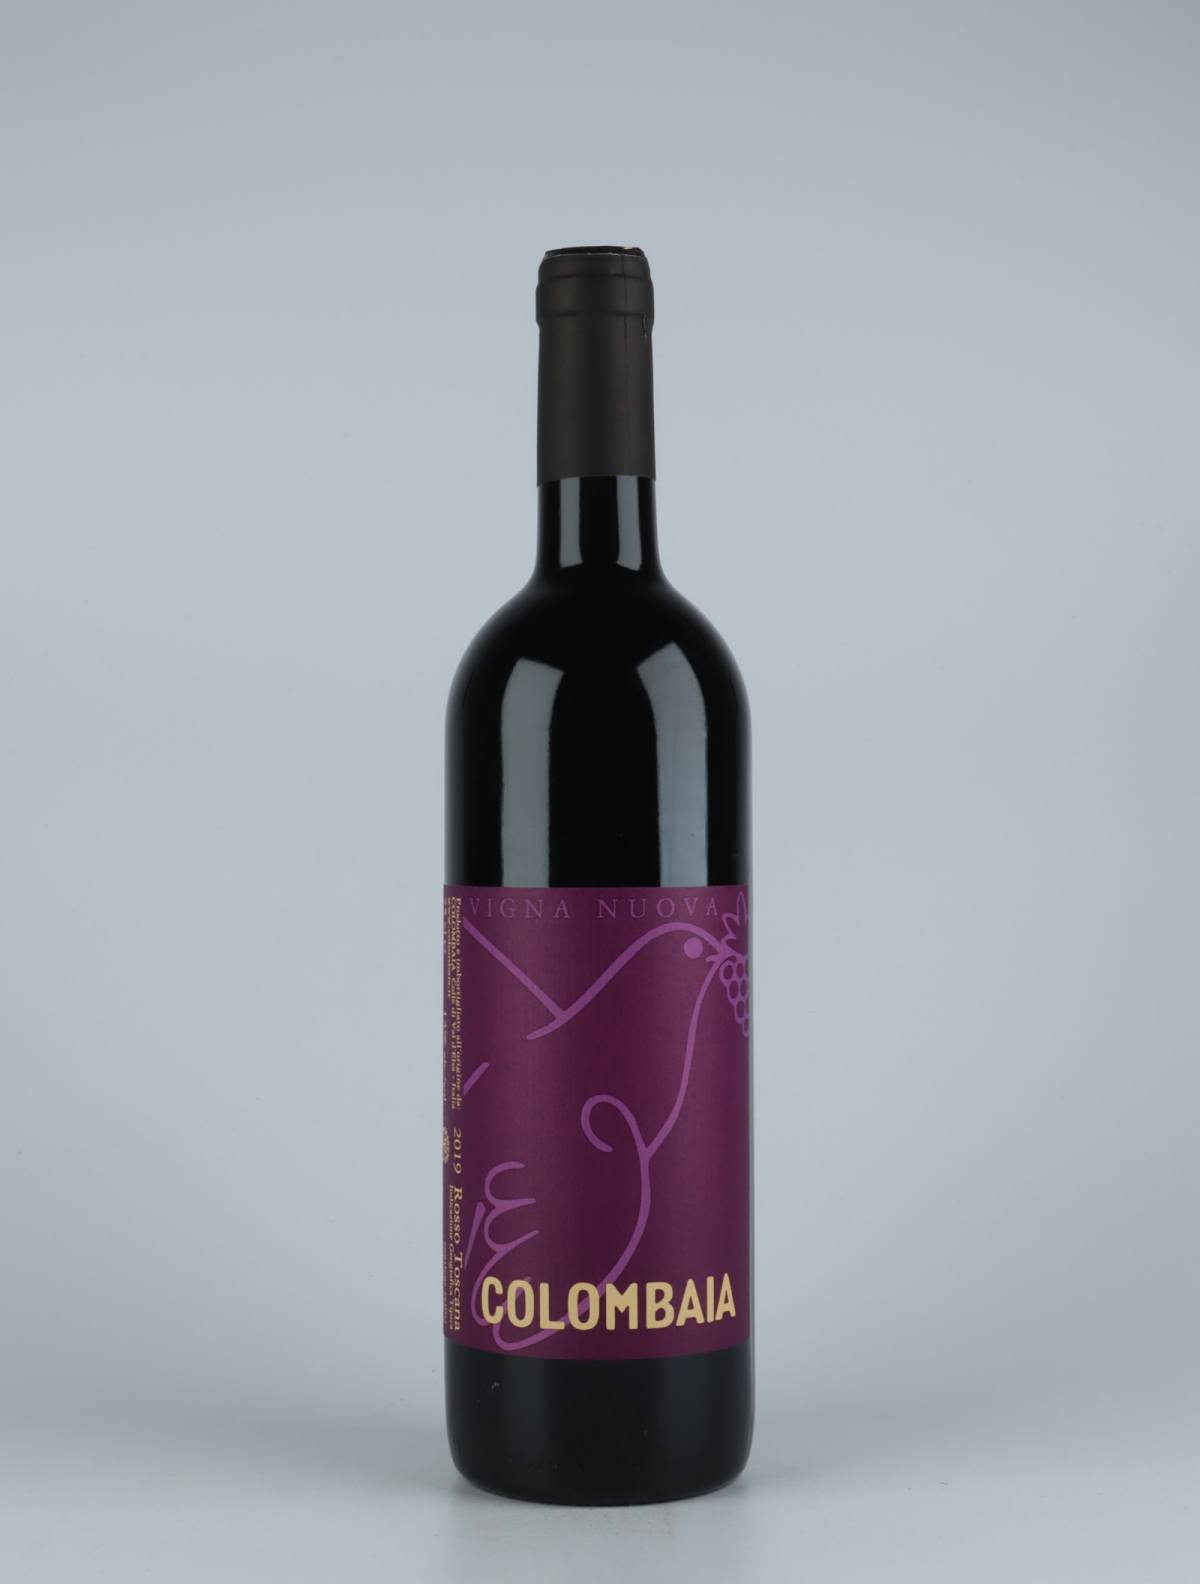 A bottle 2019 Rosso Vigna Nuova Red wine from Colombaia, Tuscany in Italy